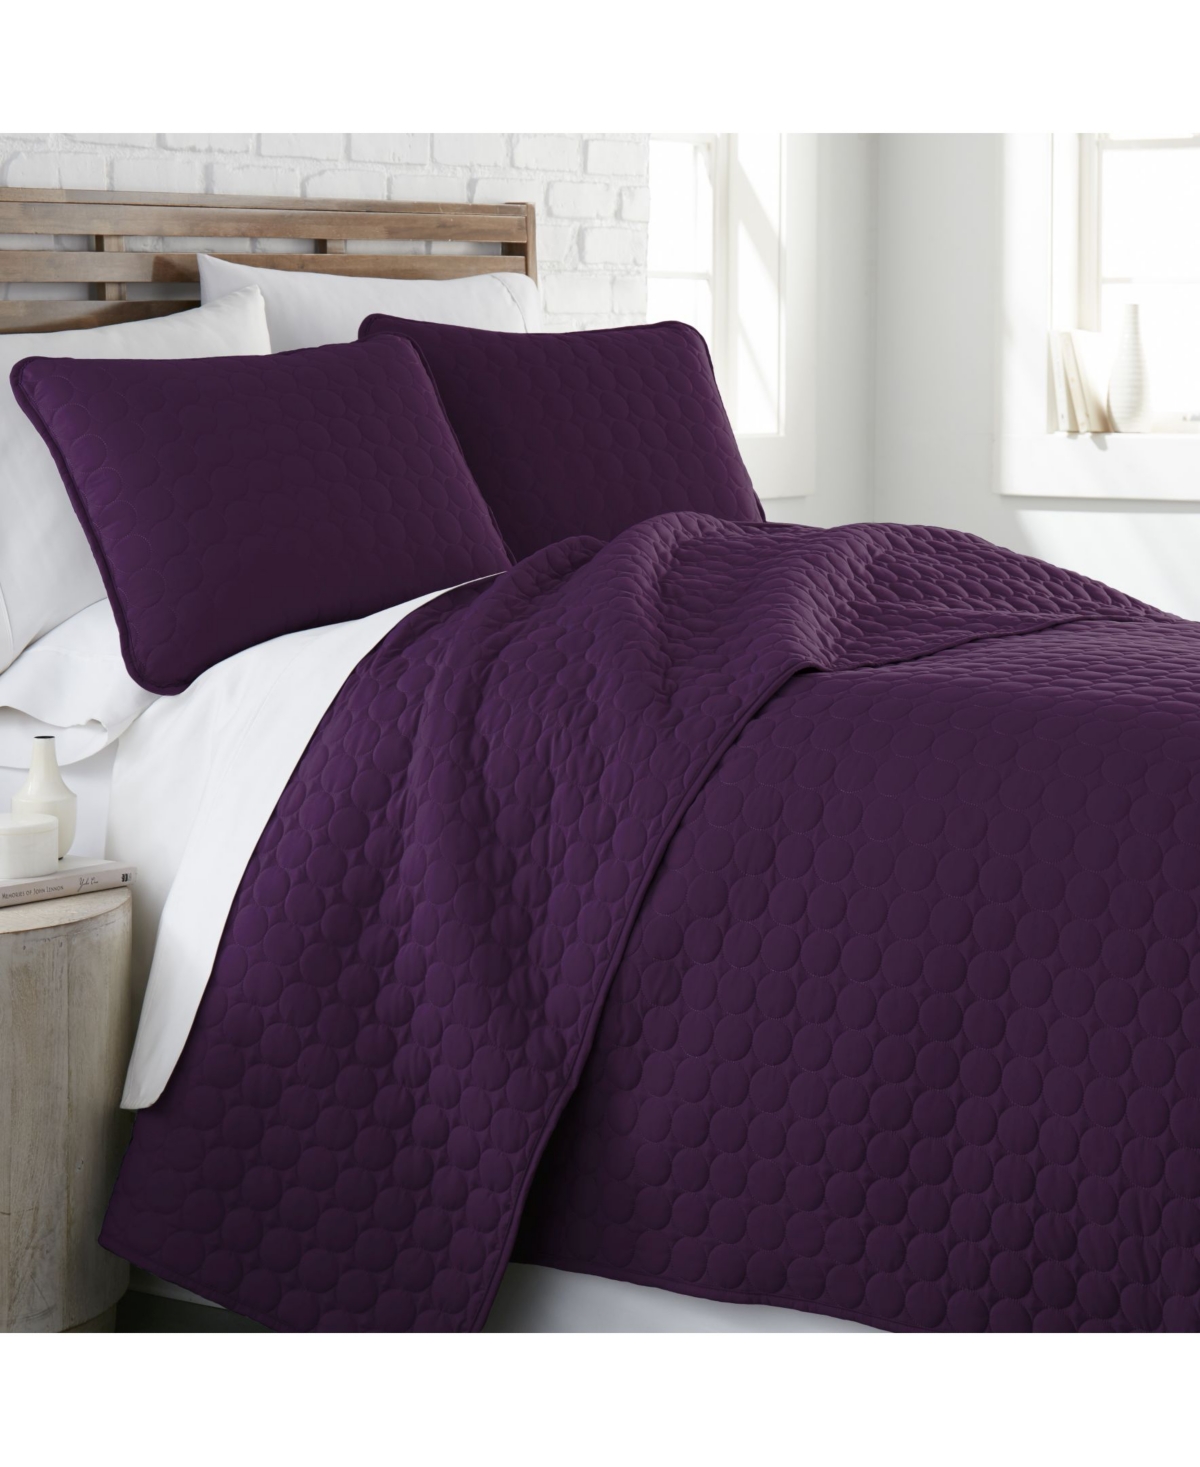 Southshore Fine Linens Ultra-soft Lightweight Embroidered 3-piece Quilt Set, King/california King In Purple